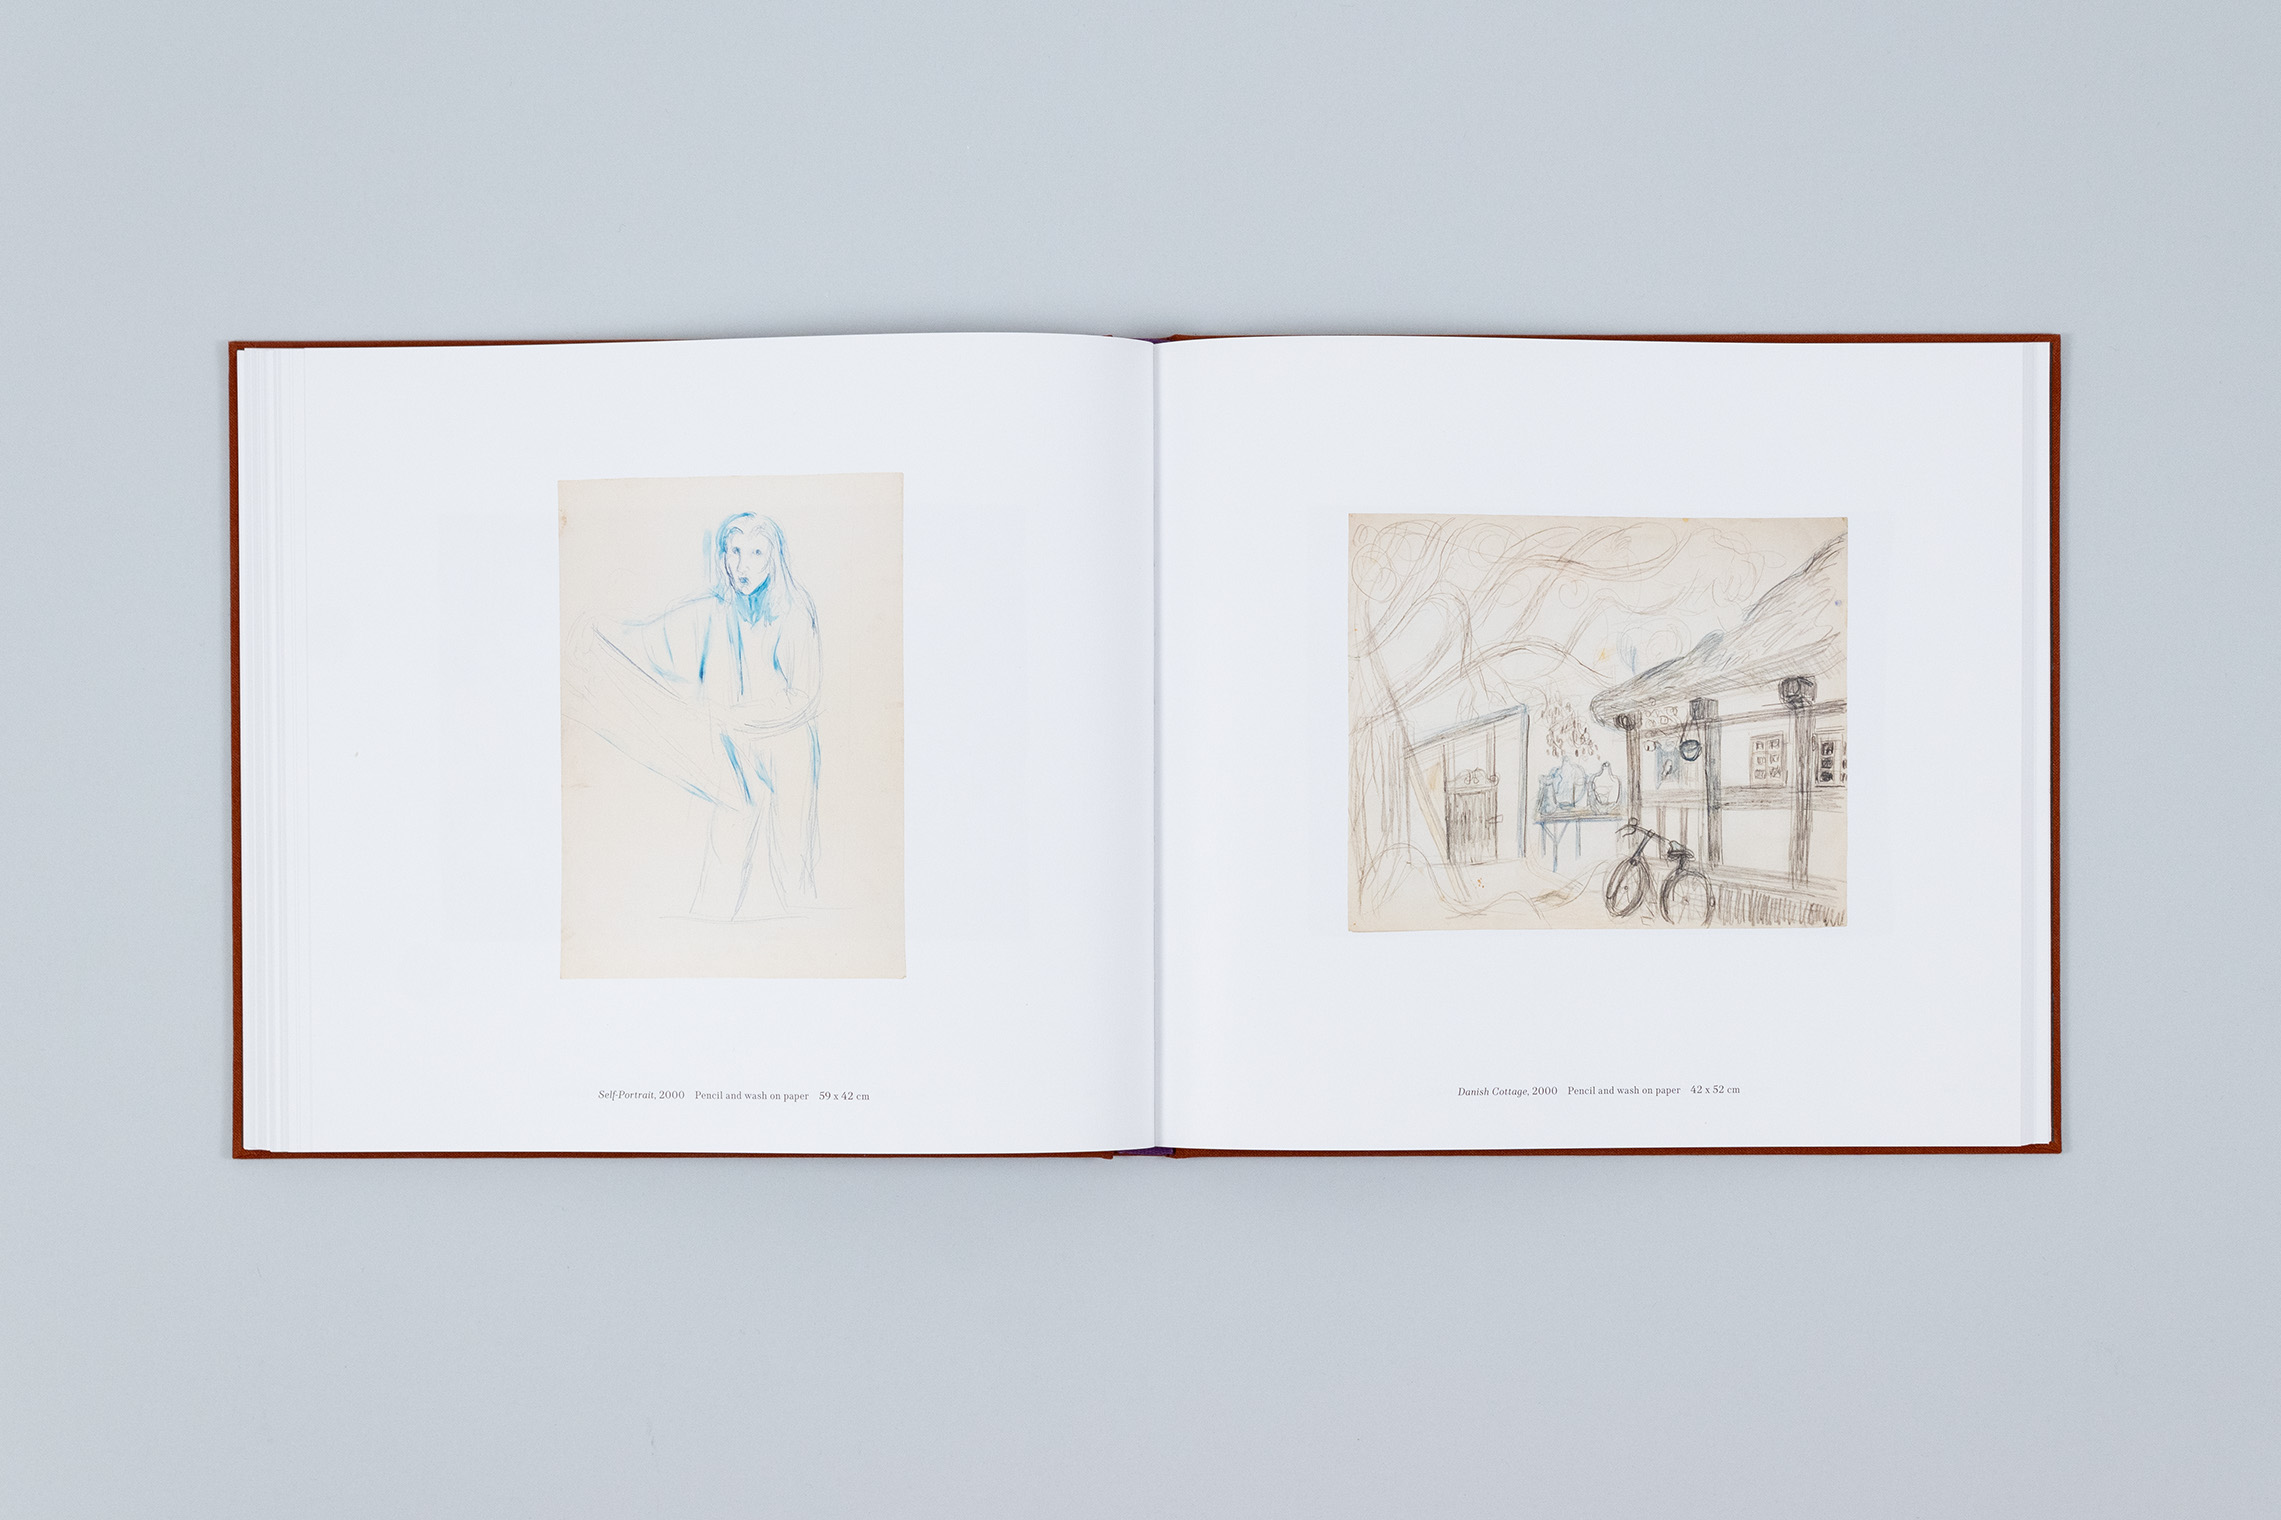 Carole Gibbons monograph spread with two works on paper over the pages, a self-portrait of Gibbons on the left